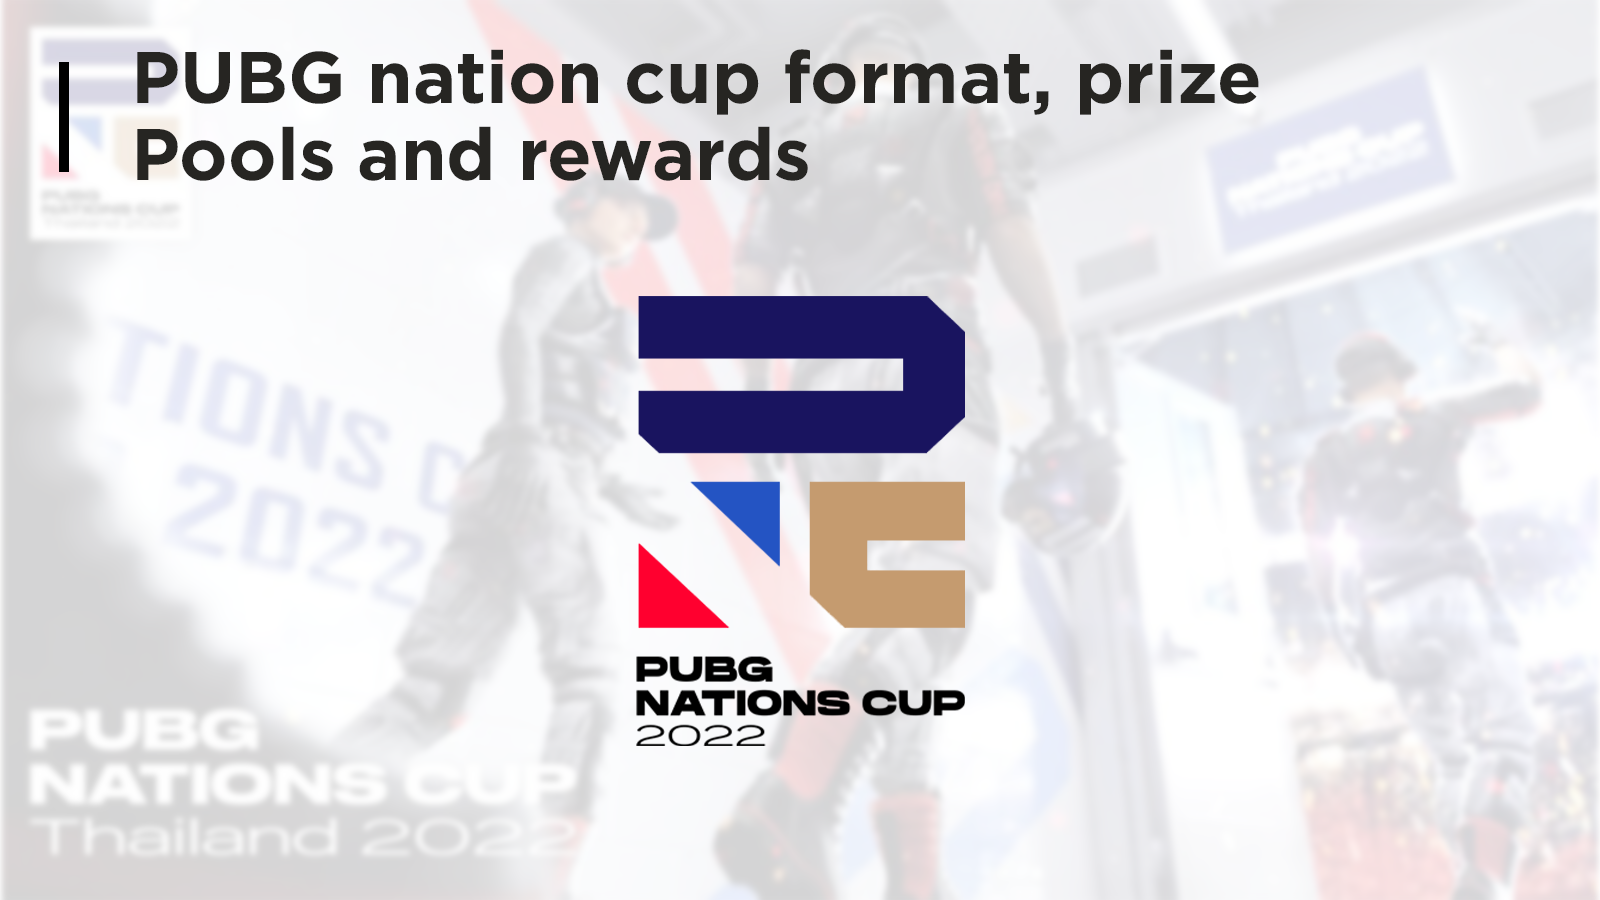 Krafton announces PUBG Nations Cup for September this year